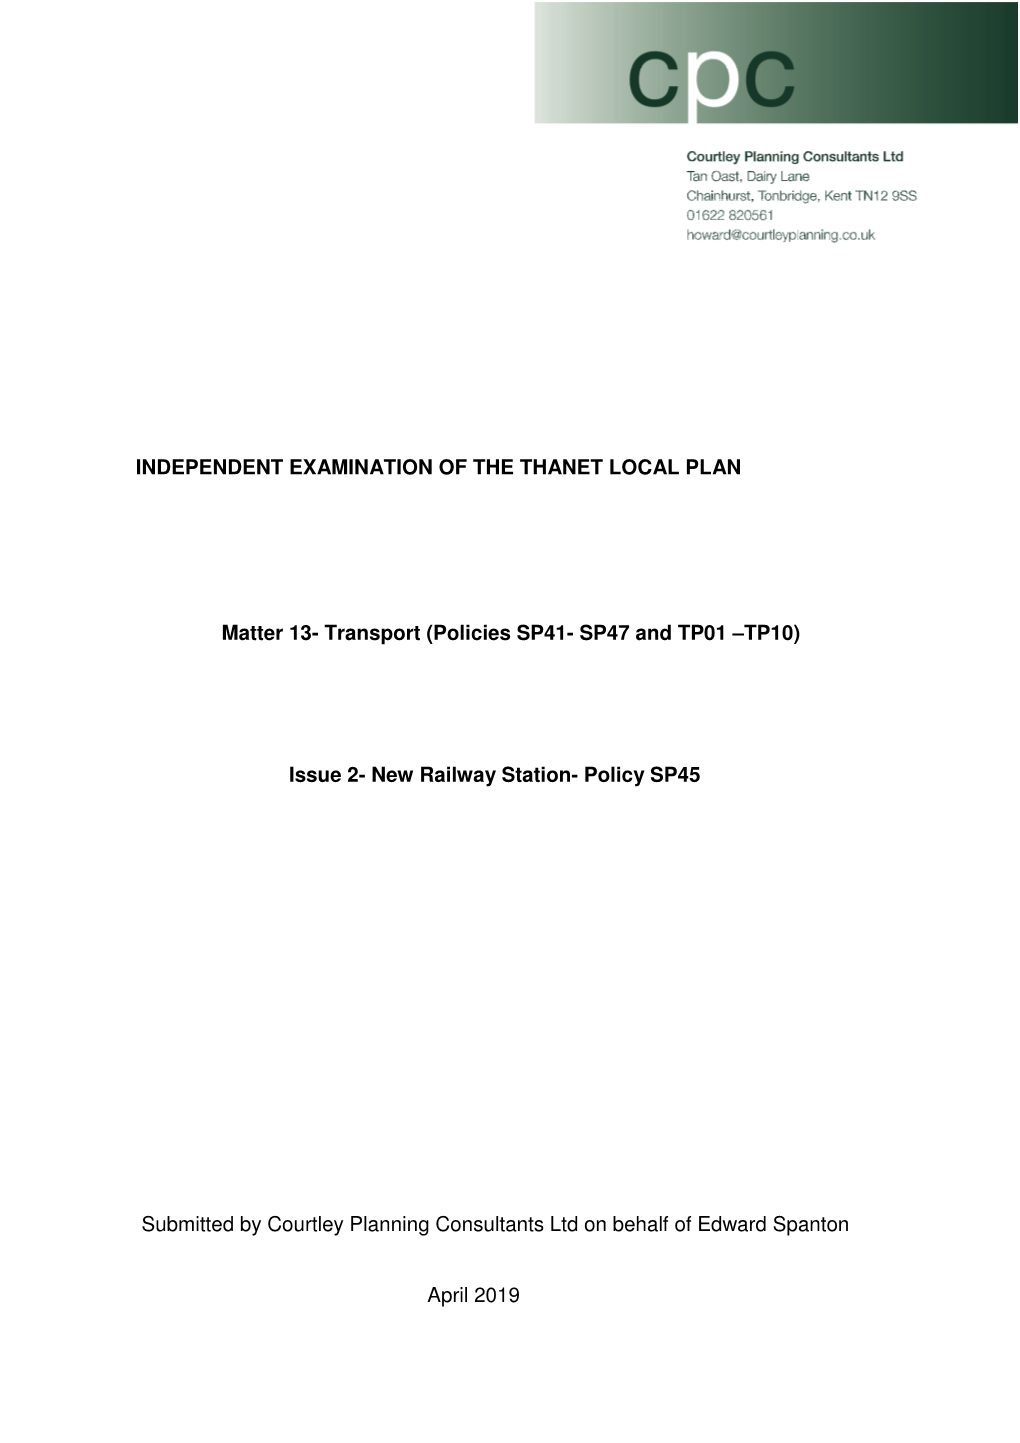 Transport (Policies SP41- SP47 and TP01 –TP10)